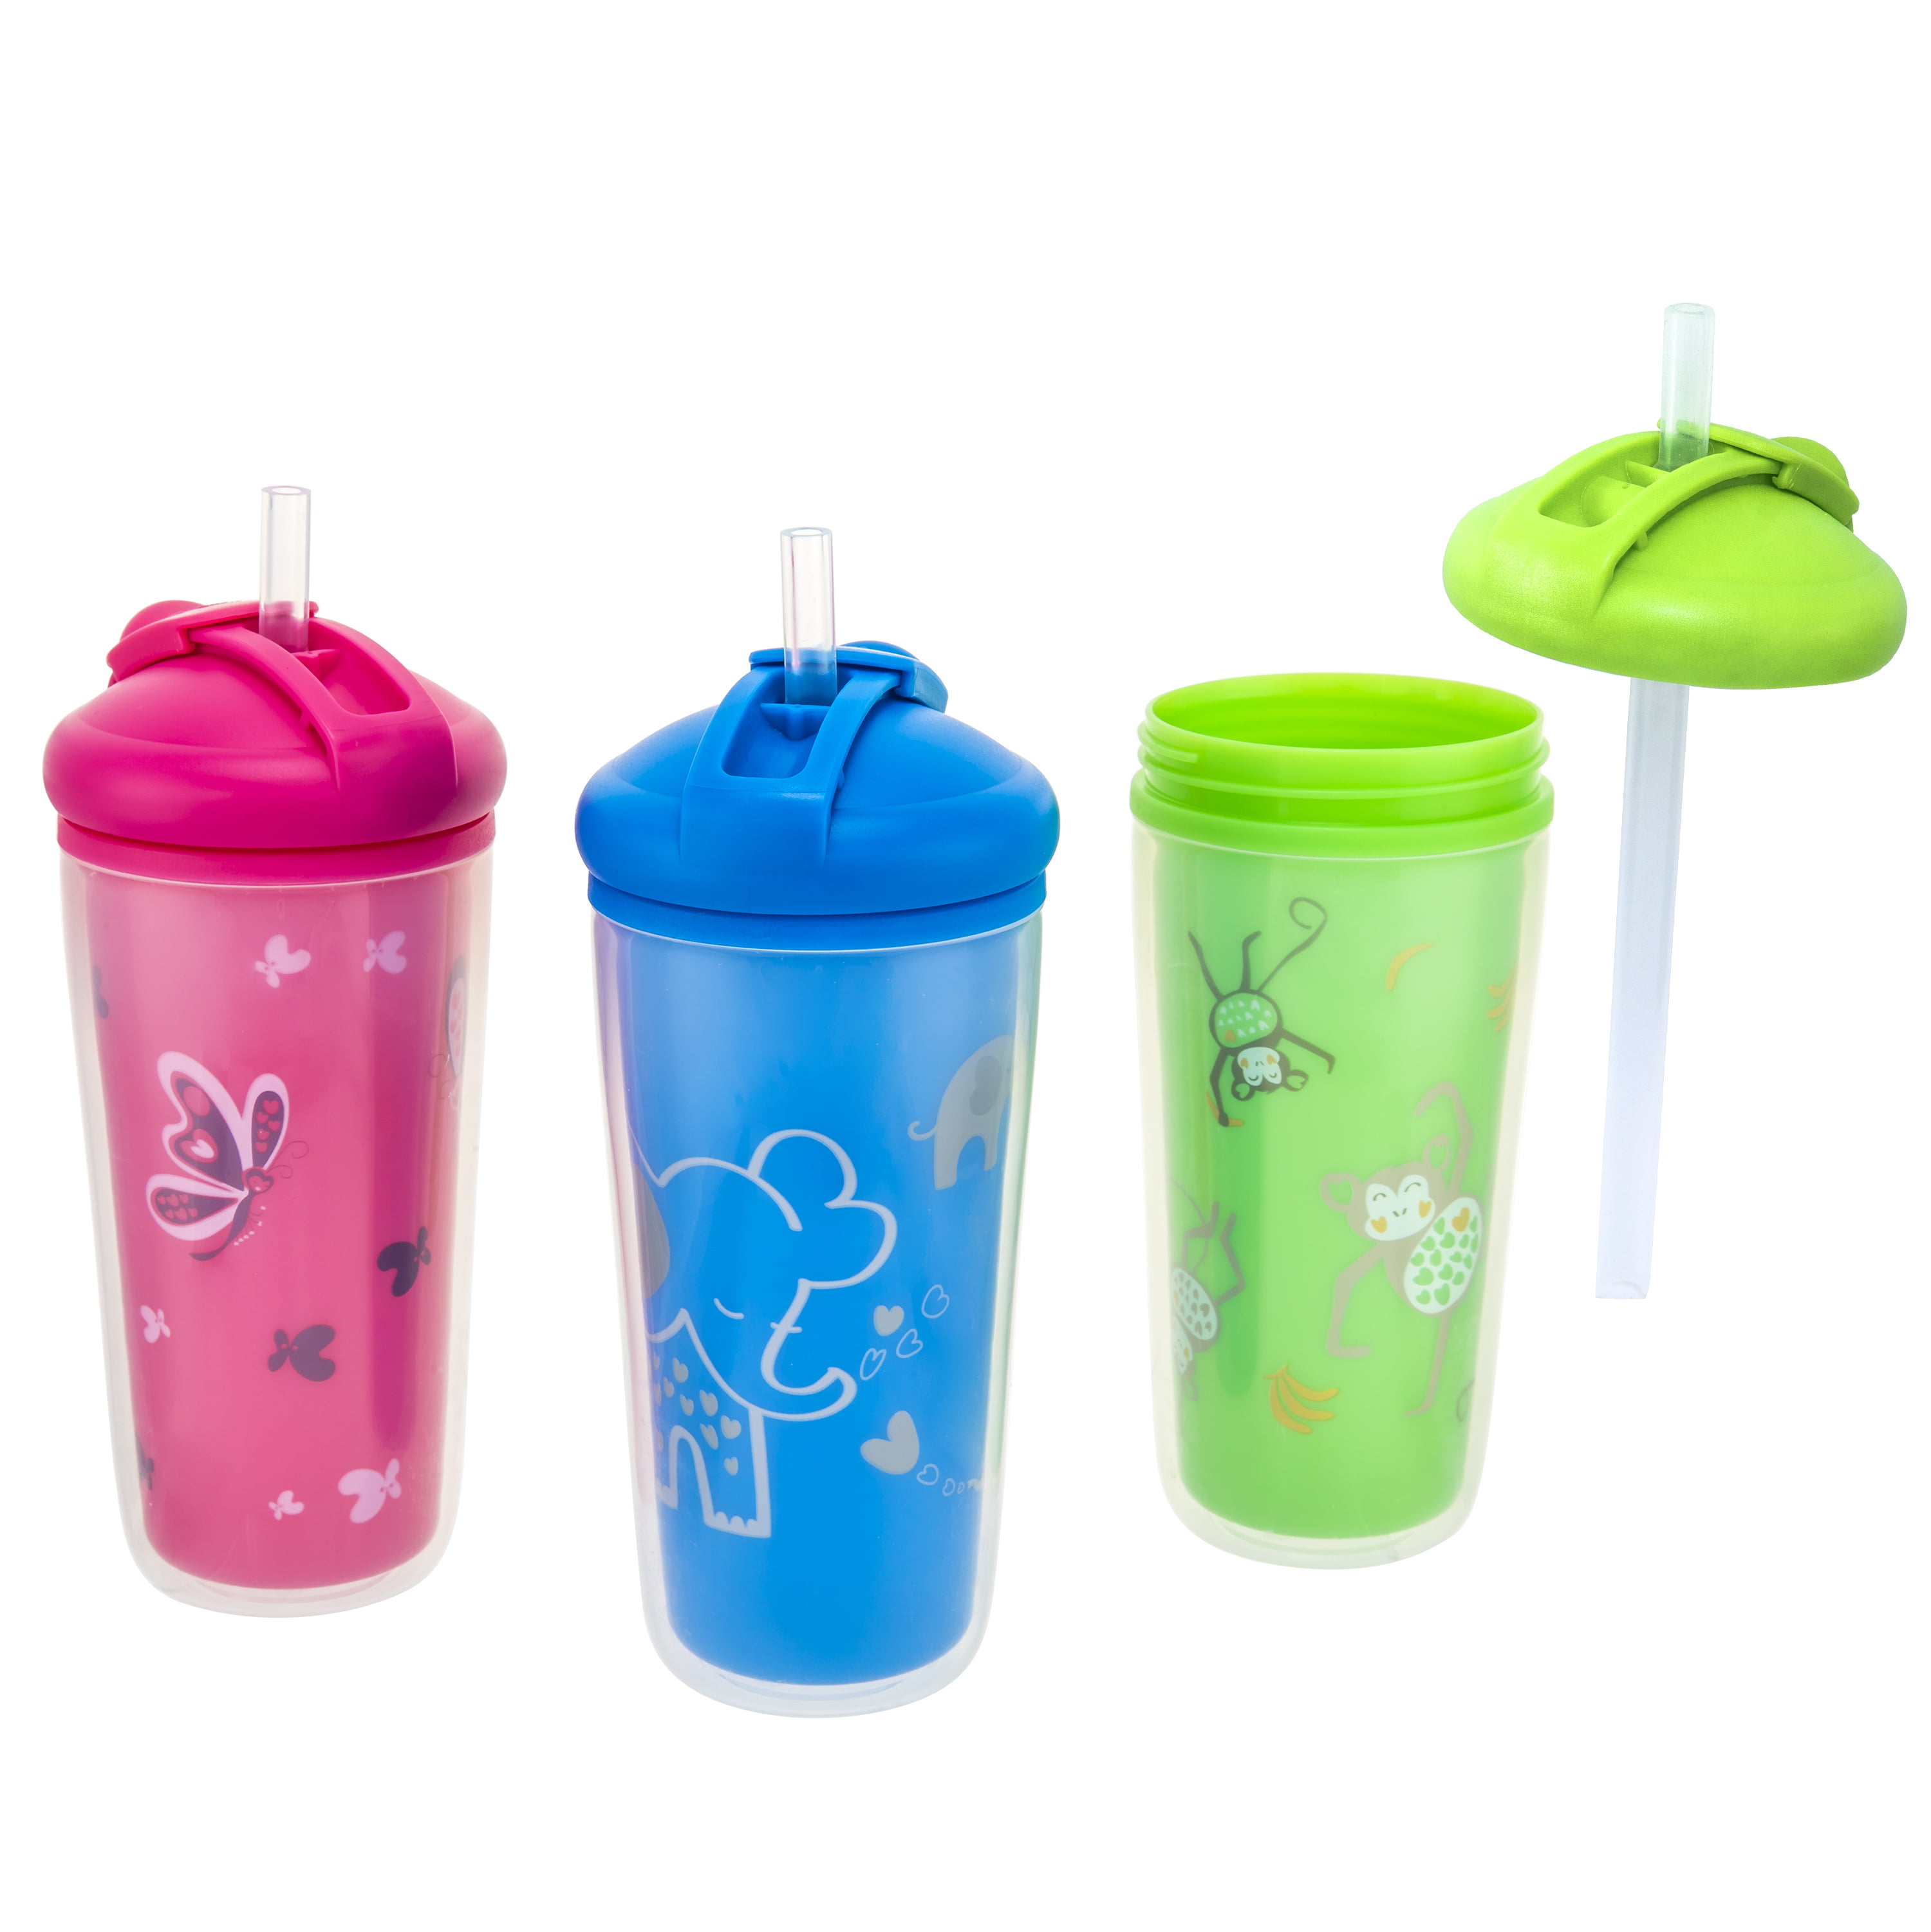 Klickpick Home Kids Cups Set - 12 Ounce Children Tumbler with straws And  Lids Stackable Stainless Steel Toddler Baby Straw Cup Powder Coated Insulated  Tumblers (Aqua Blue Green Peach Polignac)